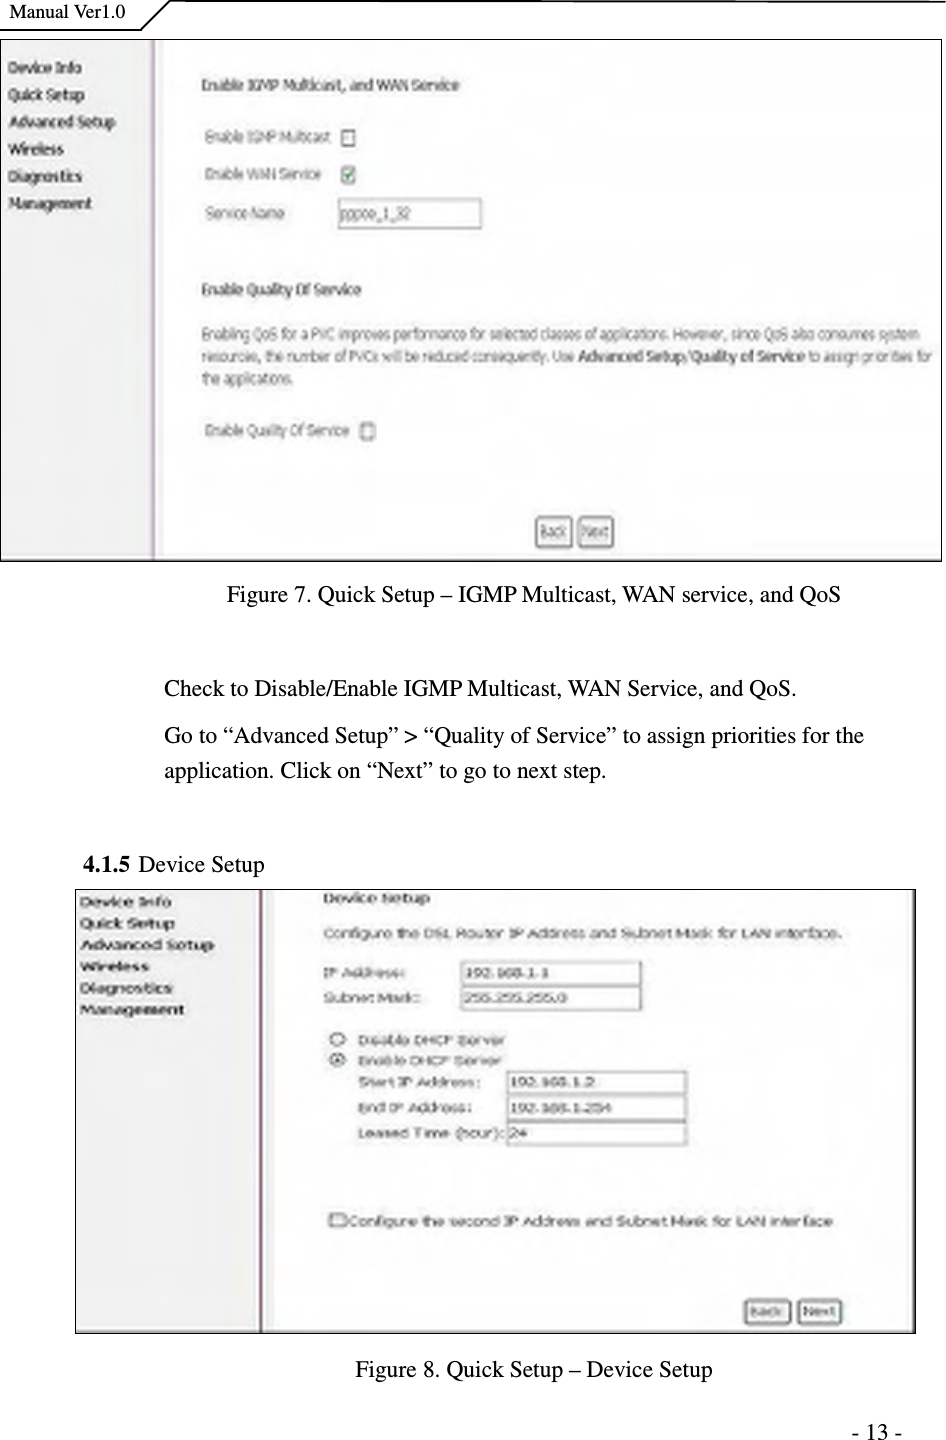    Manual Ver1.0                                                                      - 13 -  Figure 7. Quick Setup – IGMP Multicast, WAN service, and QoS  Check to Disable/Enable IGMP Multicast, WAN Service, and QoS. Go to “Advanced Setup” &gt; “Quality of Service” to assign priorities for the application. Click on “Next” to go to next step.  4.1.5 Device Setup  Figure 8. Quick Setup – Device Setup 